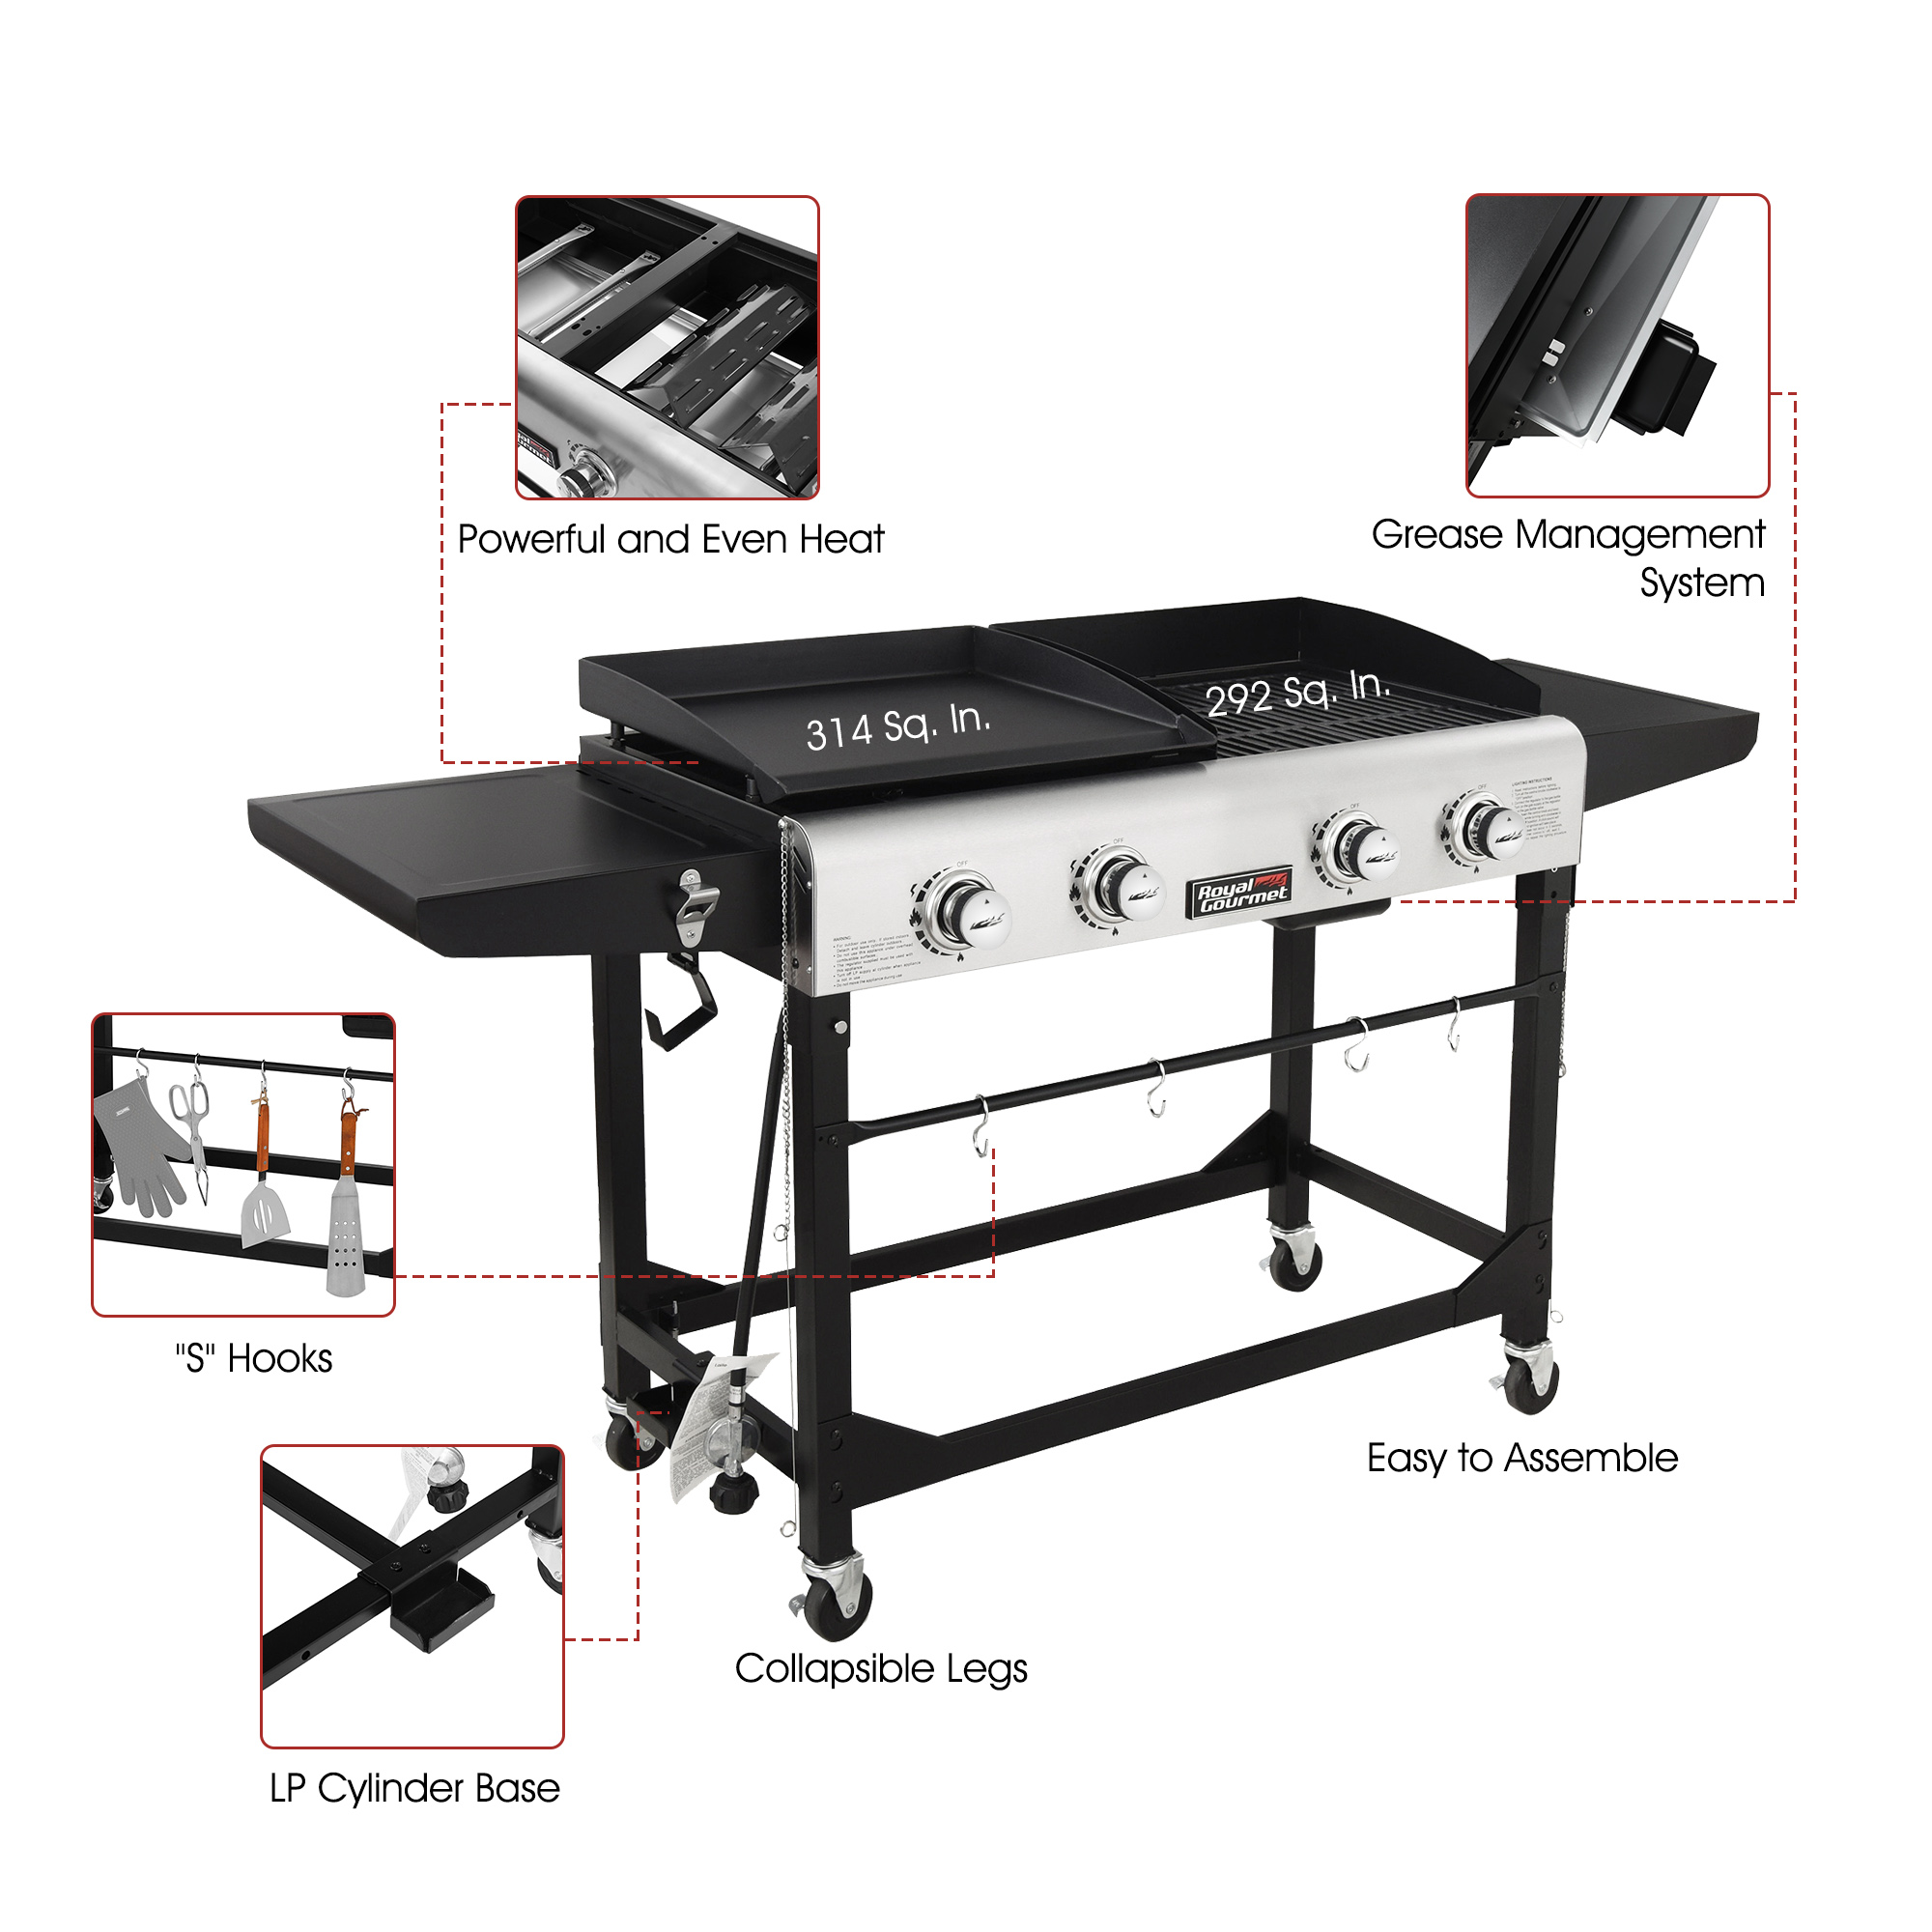 Royal Gourmet 4-Burner GD401 Portable Flat Top Gas Grill and Griddle Combo with Folding Legs - image 5 of 9